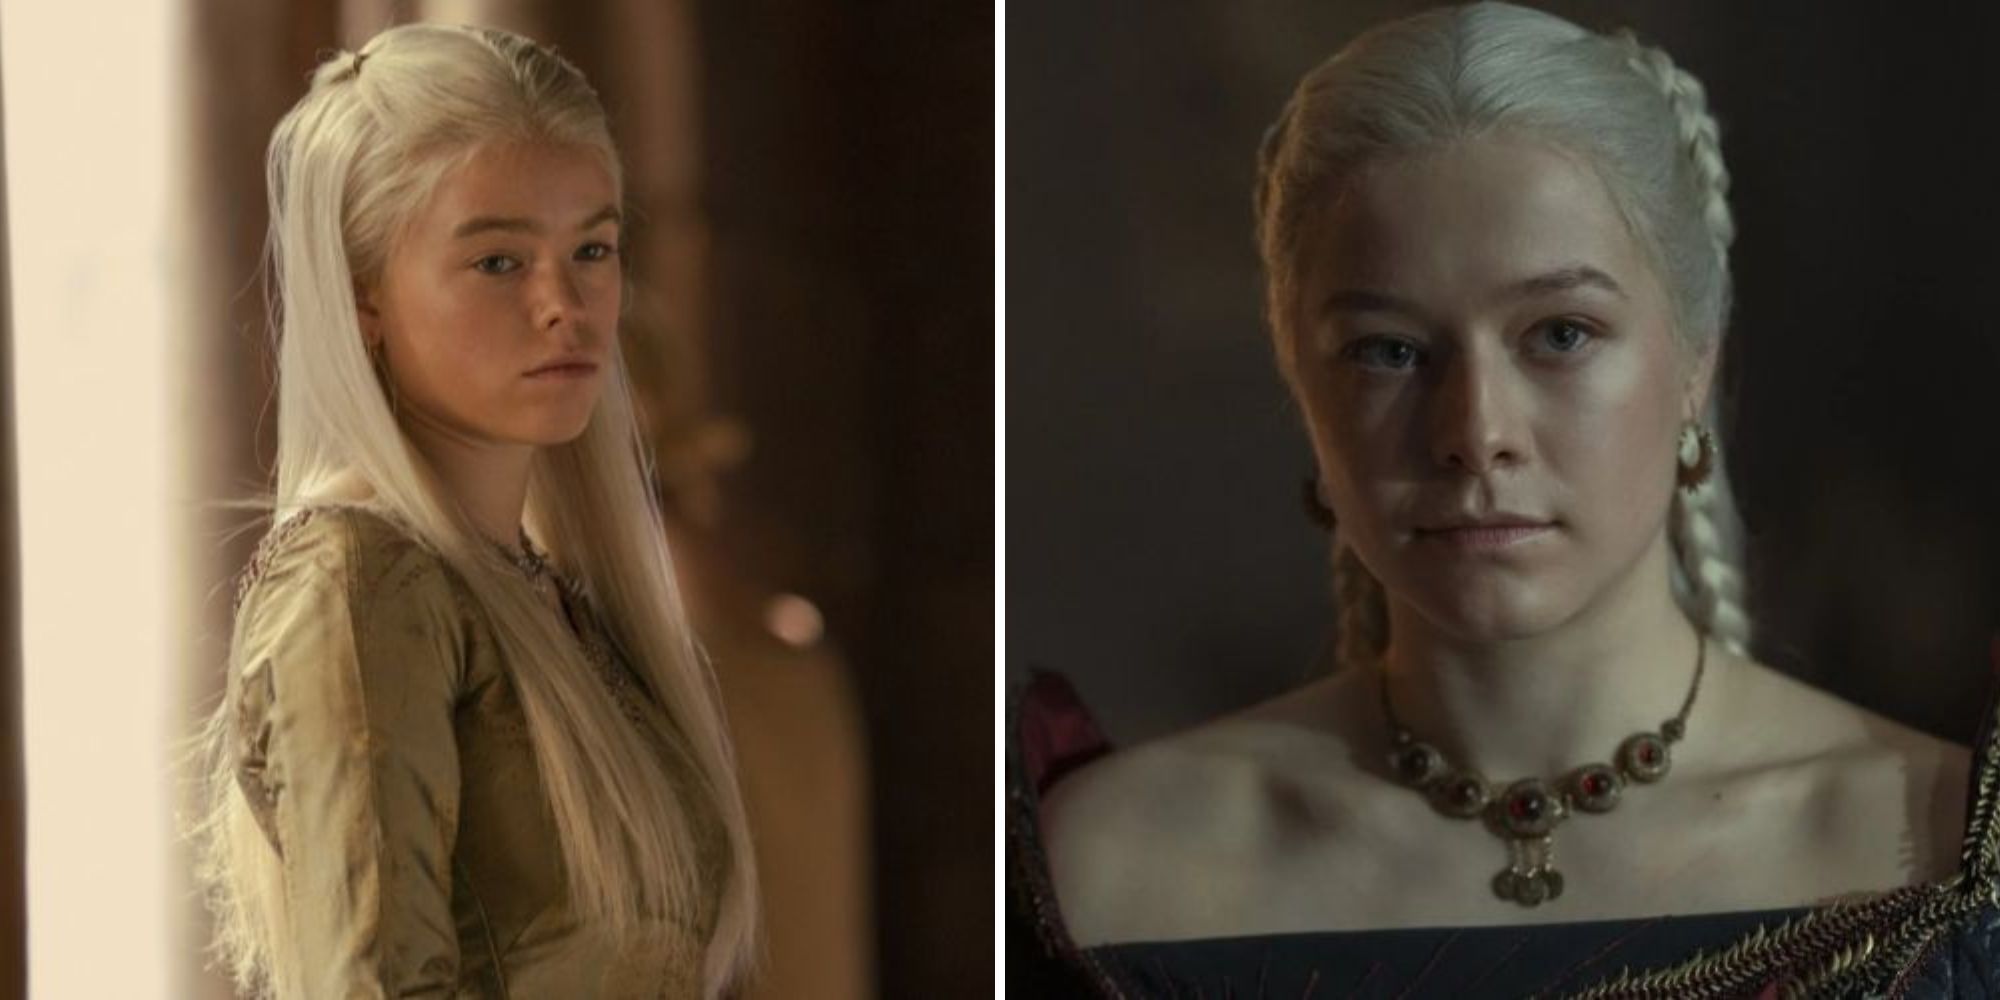 Princess Rhaenyra as a teen on the left and a young woman on the right